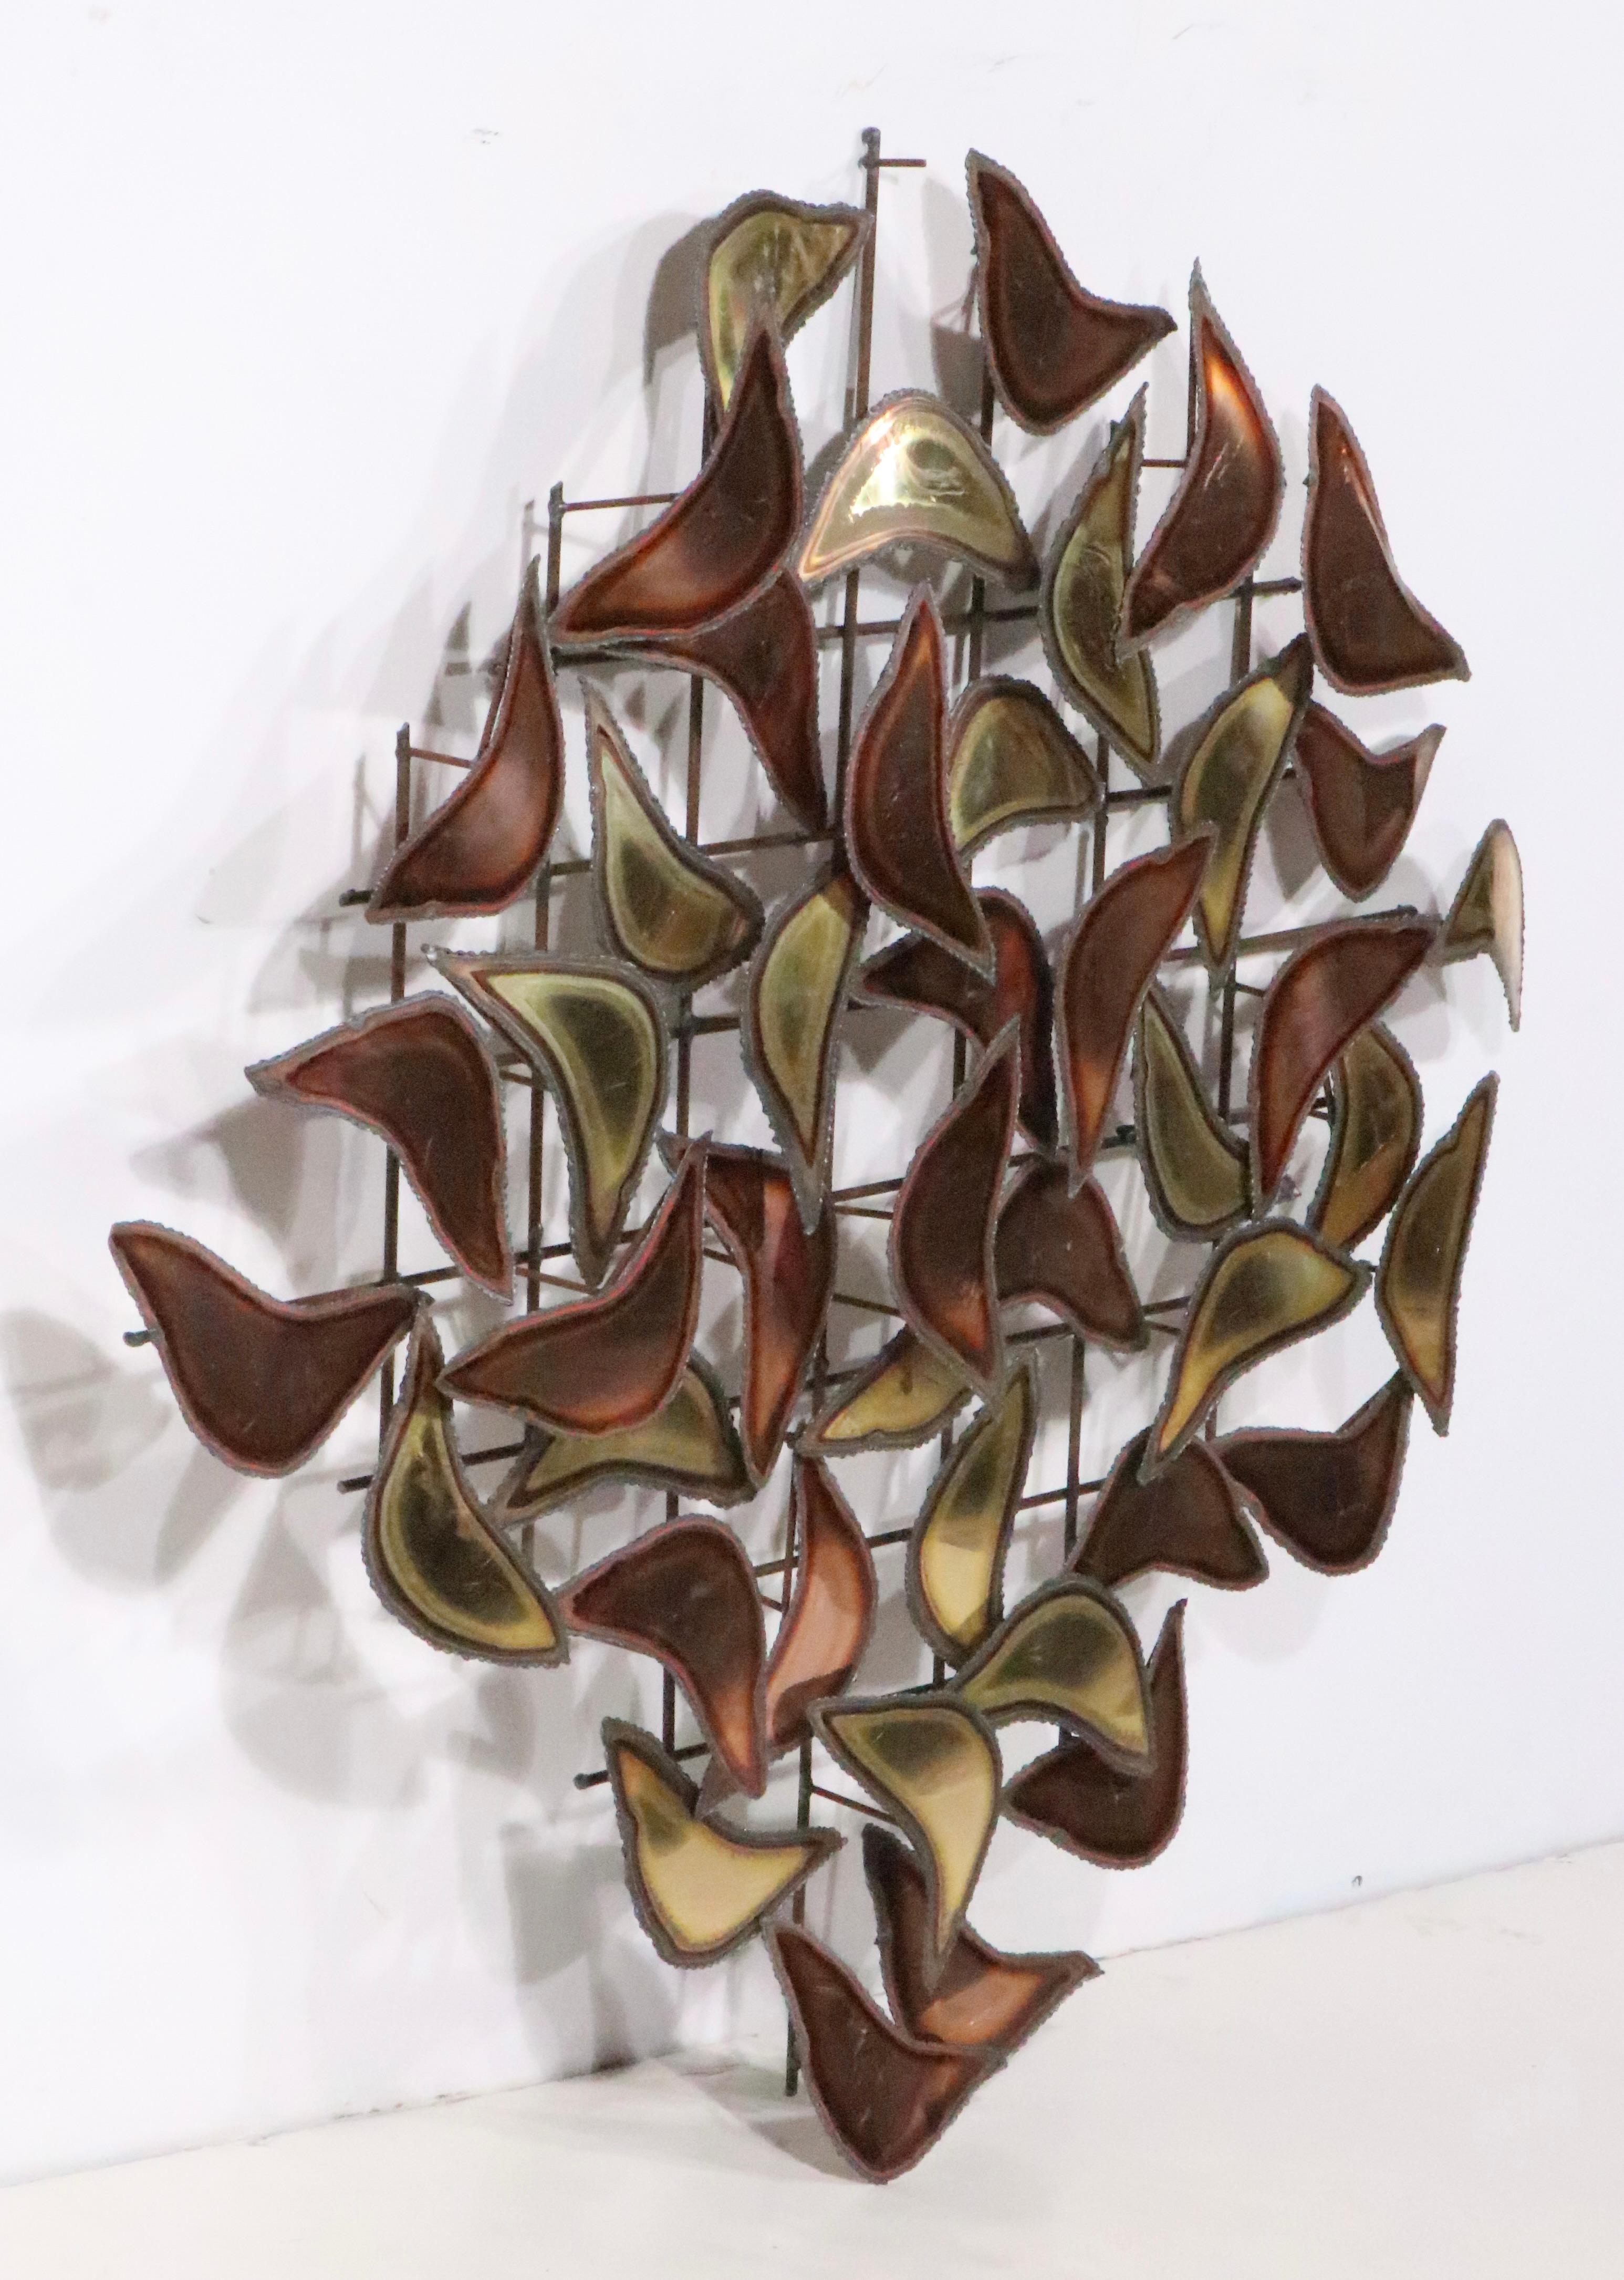 Attractive Brutalist  wall mounted sculpture, attributed to Curtis Jere  circa 1970's.
 The sculpture features repeating copper, and bronze colored organic form shapes, mounted on a grid form back. The piece appears to be missing one tear drop form